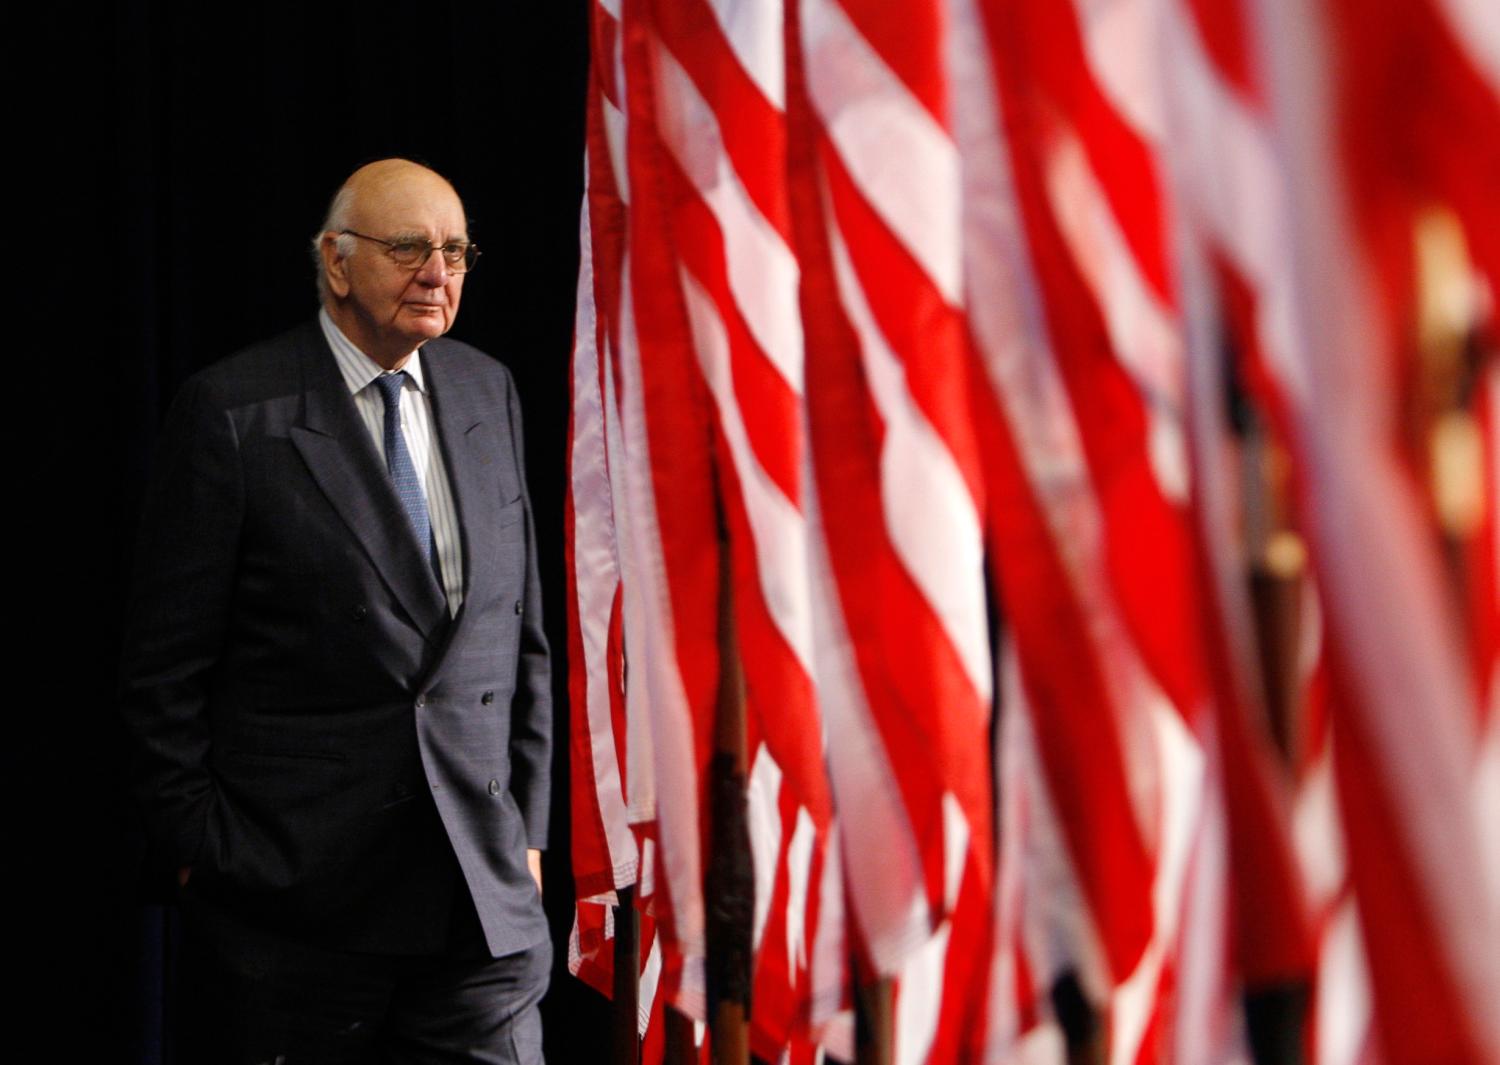 Paul Volcker arrives for a news conference where US President-elect Barack Obama (not pictured) presented his choices for his newly formed Economic Recovery Board in Chicago November 26, 2008. Volcker, 81, will be the chair of the panel and Austan Goolsbee (not pictured) will serve as its staff director. REUTERS/John  Gress (UNITED STATES) - GM1E4BR02S801